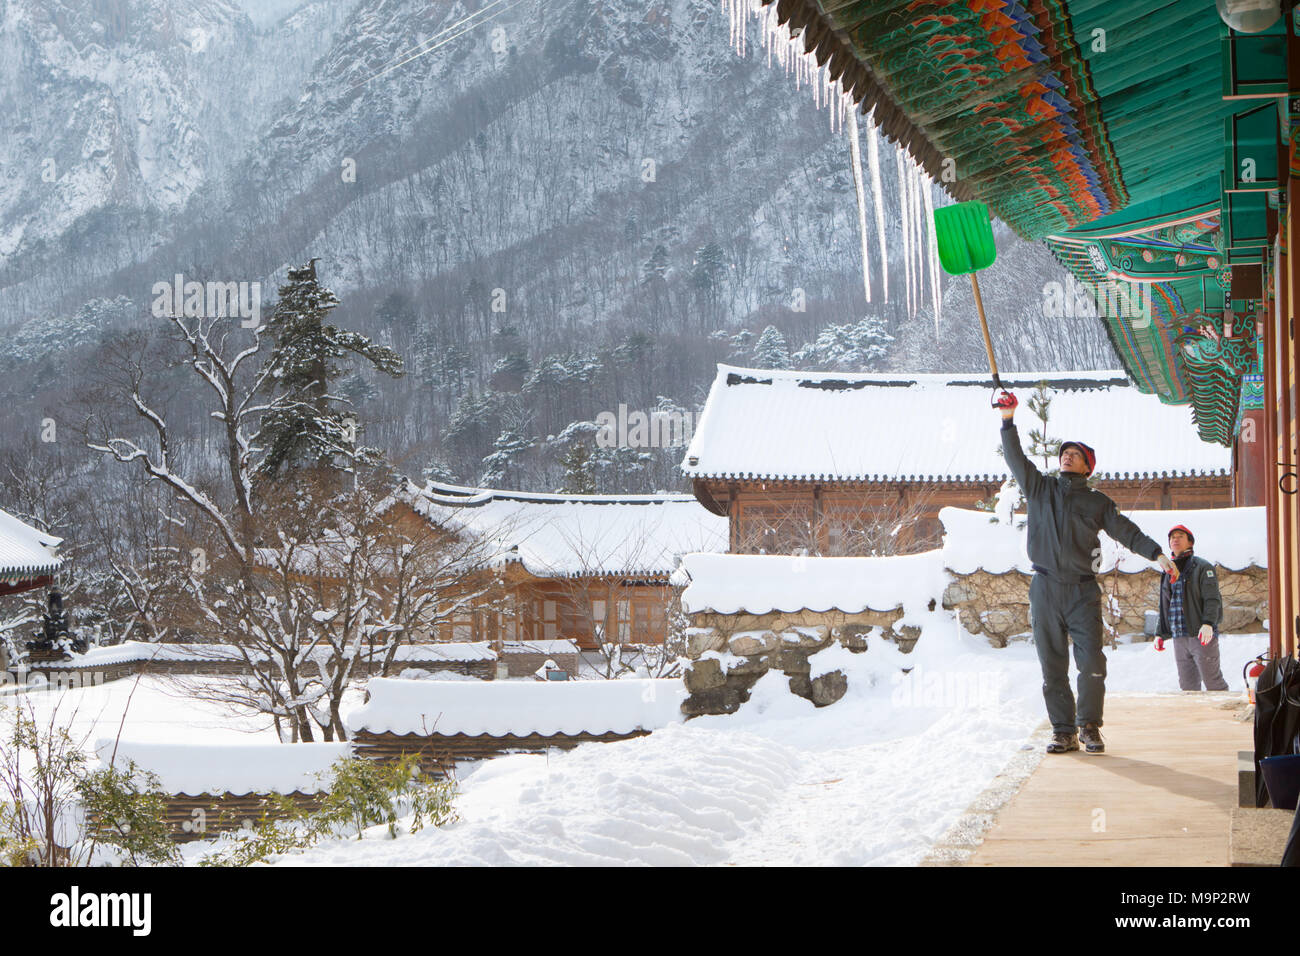 A monk is removing ice from the roof of the Buddhist Sinheung-sa temple in Seoraksan National Park, Gangwon-do, South Korea.  Seoraksan is a beautiful and iconic National Park in the mountains near Sokcho in the Gangwon-do region of South Korea. The name refers to Snowy Crags Mountains. Set against the landscape are two Buddhist temples: Sinheung-sa and Beakdam-sa. This region is hosting the winter Olympics in February 2018.   Seoraksan is a beautiful and iconic National Park in the mountains near Sokcho in the Gangwon-do region of South Korea. The name refers to Snowy Crags Mountains. Set Stock Photo